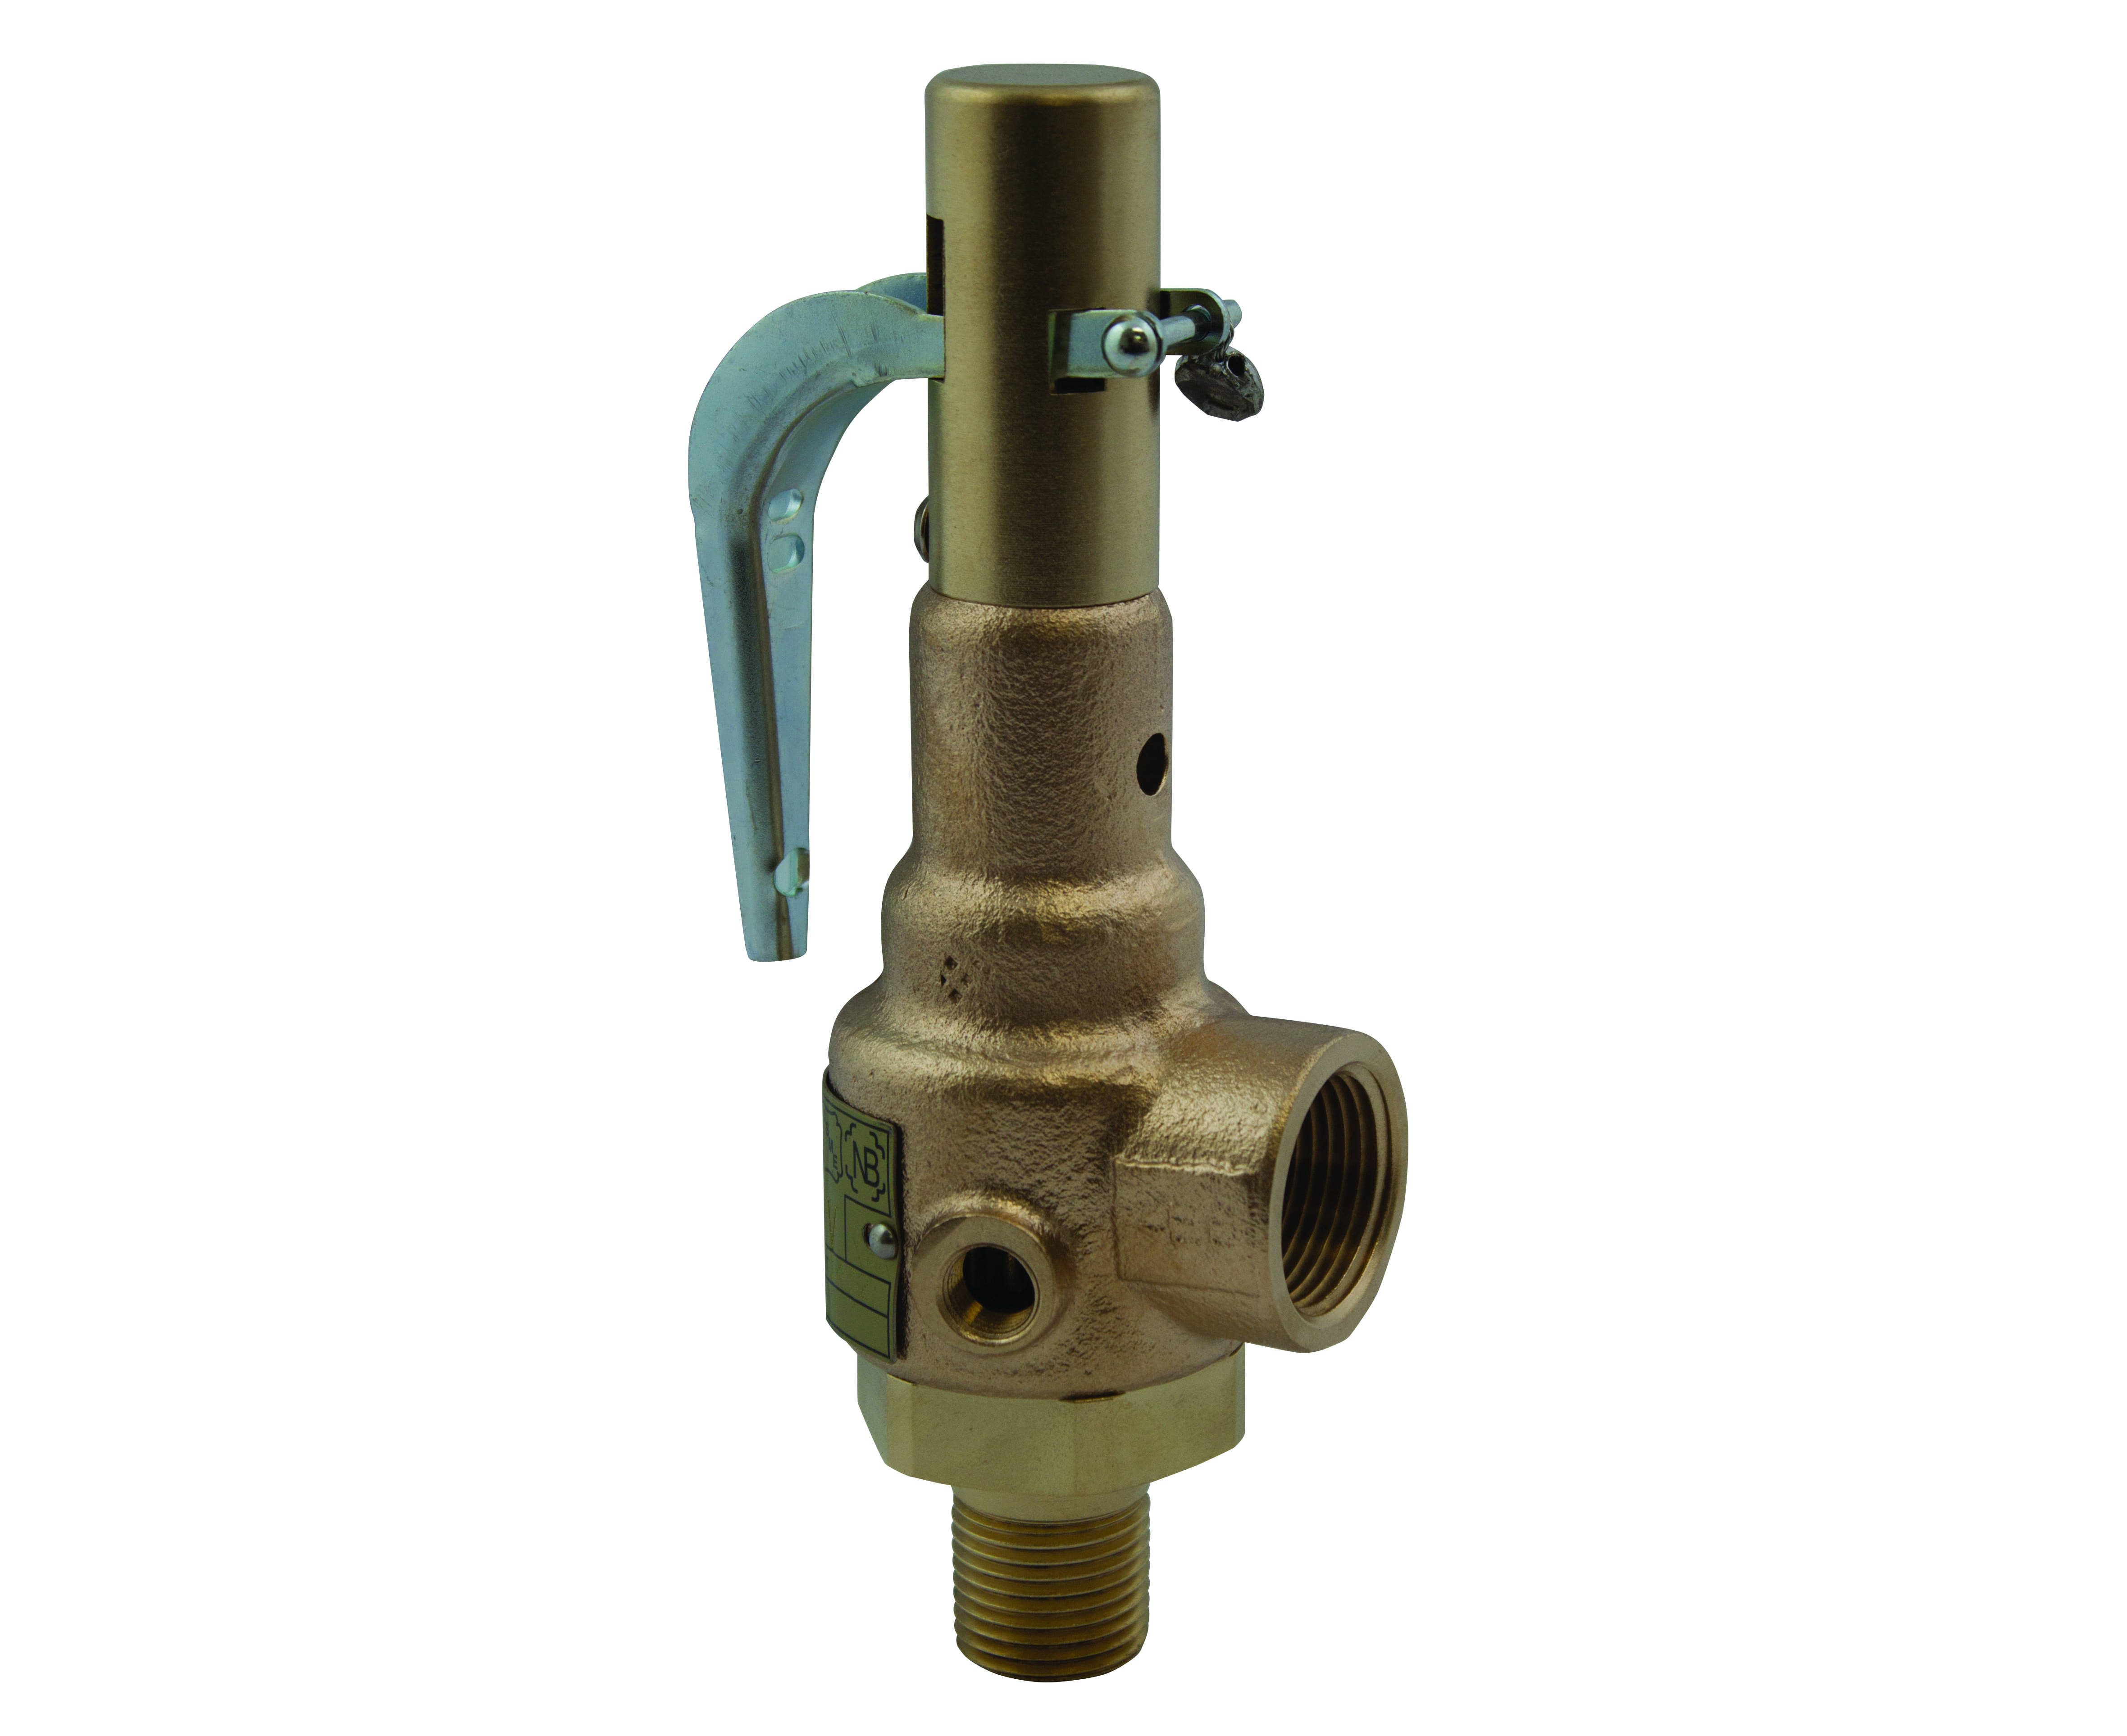 Preview image for Apollo ASME Sec VIII Steam Bronze Safety Relief Valves with Brass Trim, Teflon Seat, CE/PED Compliant, Performance Test Reports Included, 1" x 1-1/4" (MNPT x FNPT)